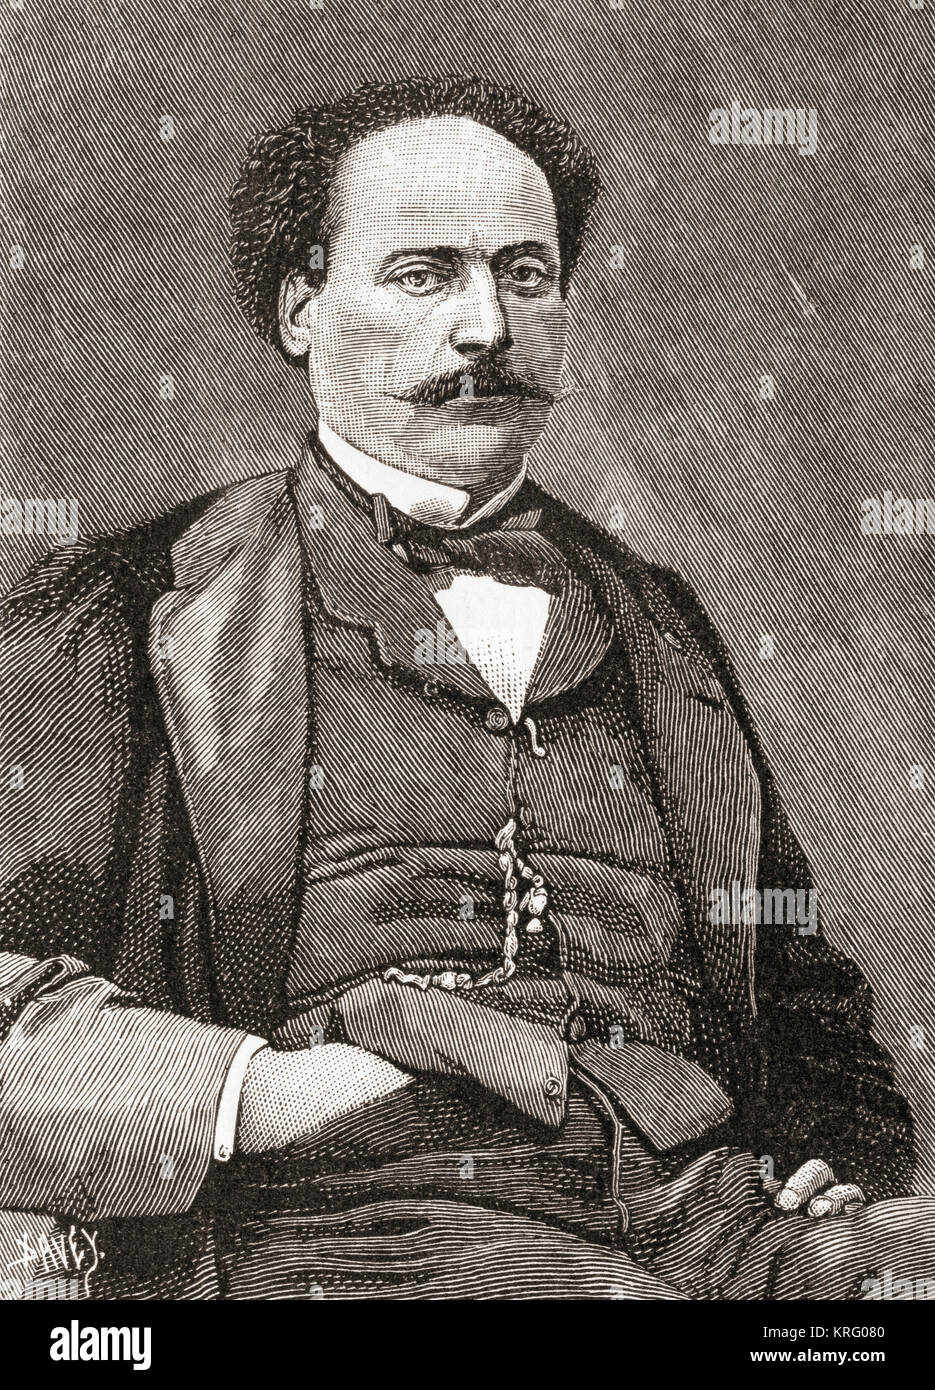 Alexandre Dumas, fils, 1824 –  1895.  French author and playwright.  Seen here aged 40.  From The Strand Magazine, published January to June 1894. Stock Photo